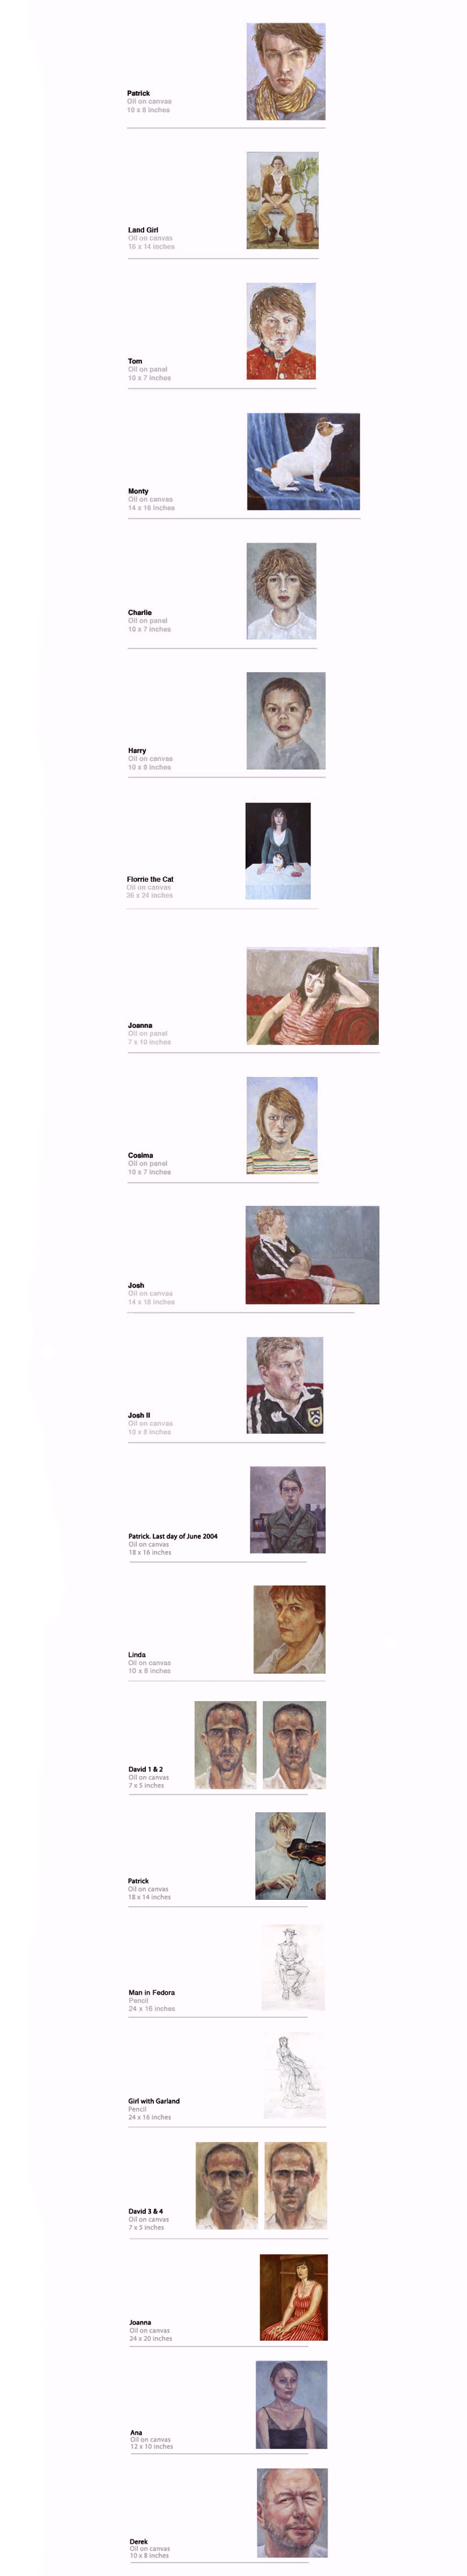 New Portraits Page 